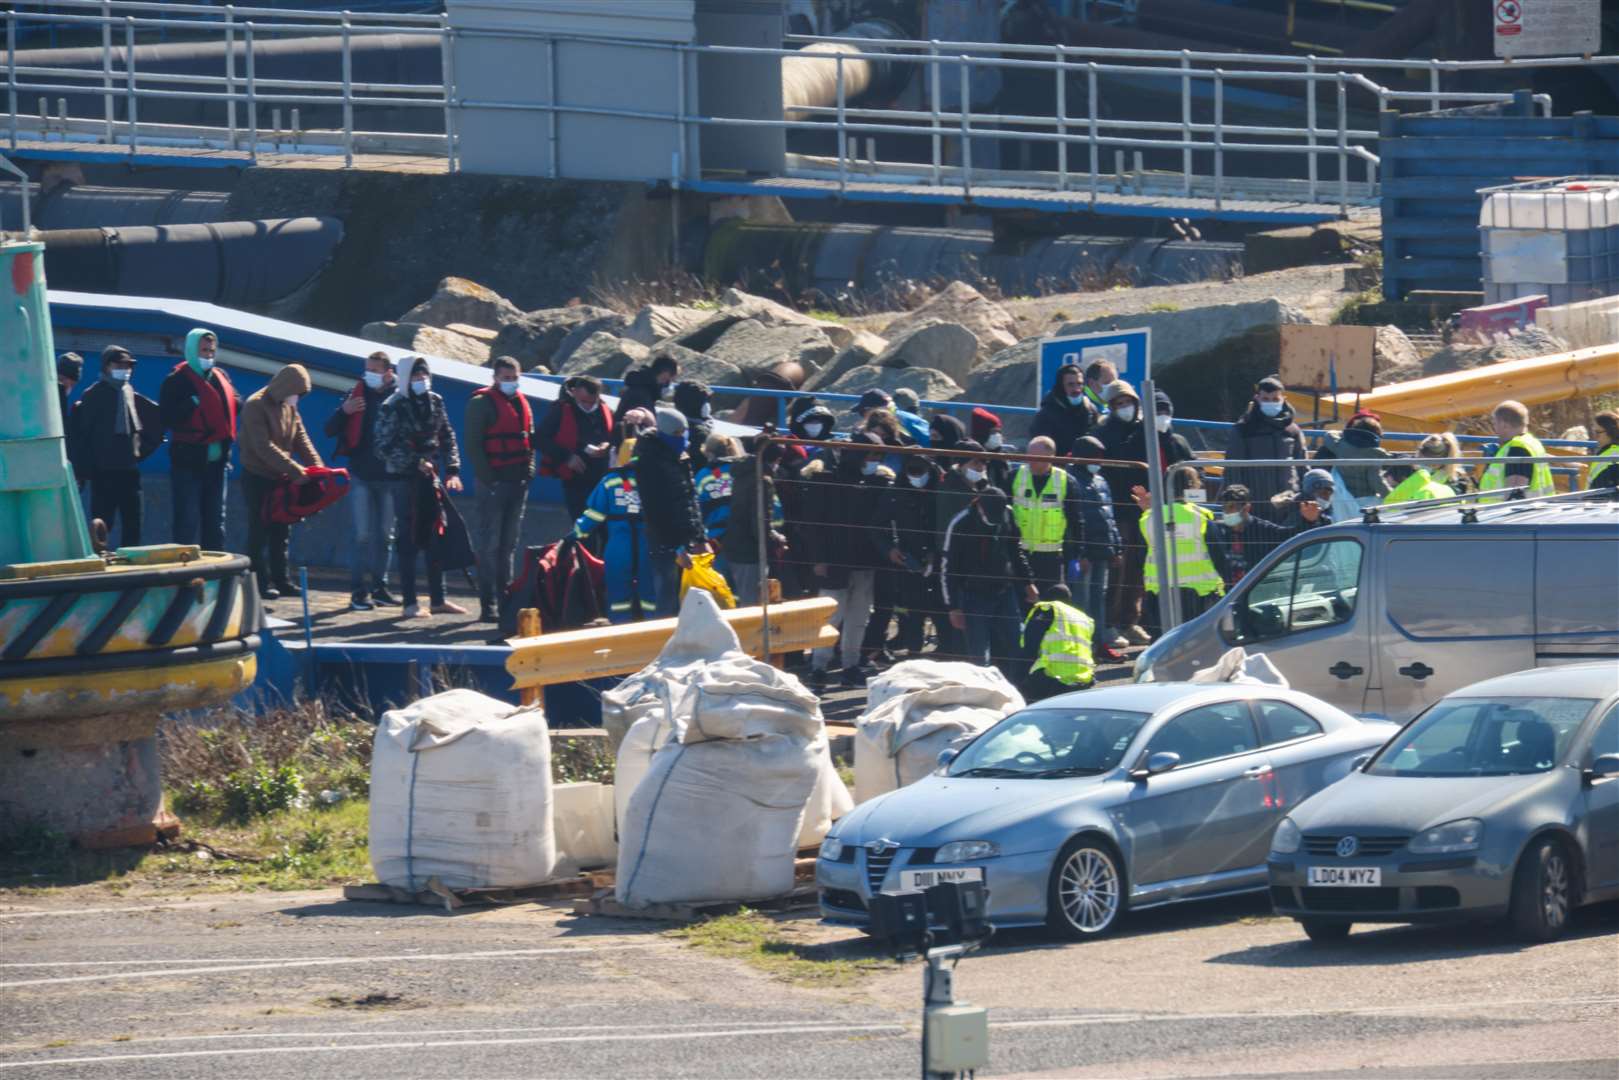 A number of asylum seekers were seen arriving at the Port of Ramsgate today. Picture: UKNIP